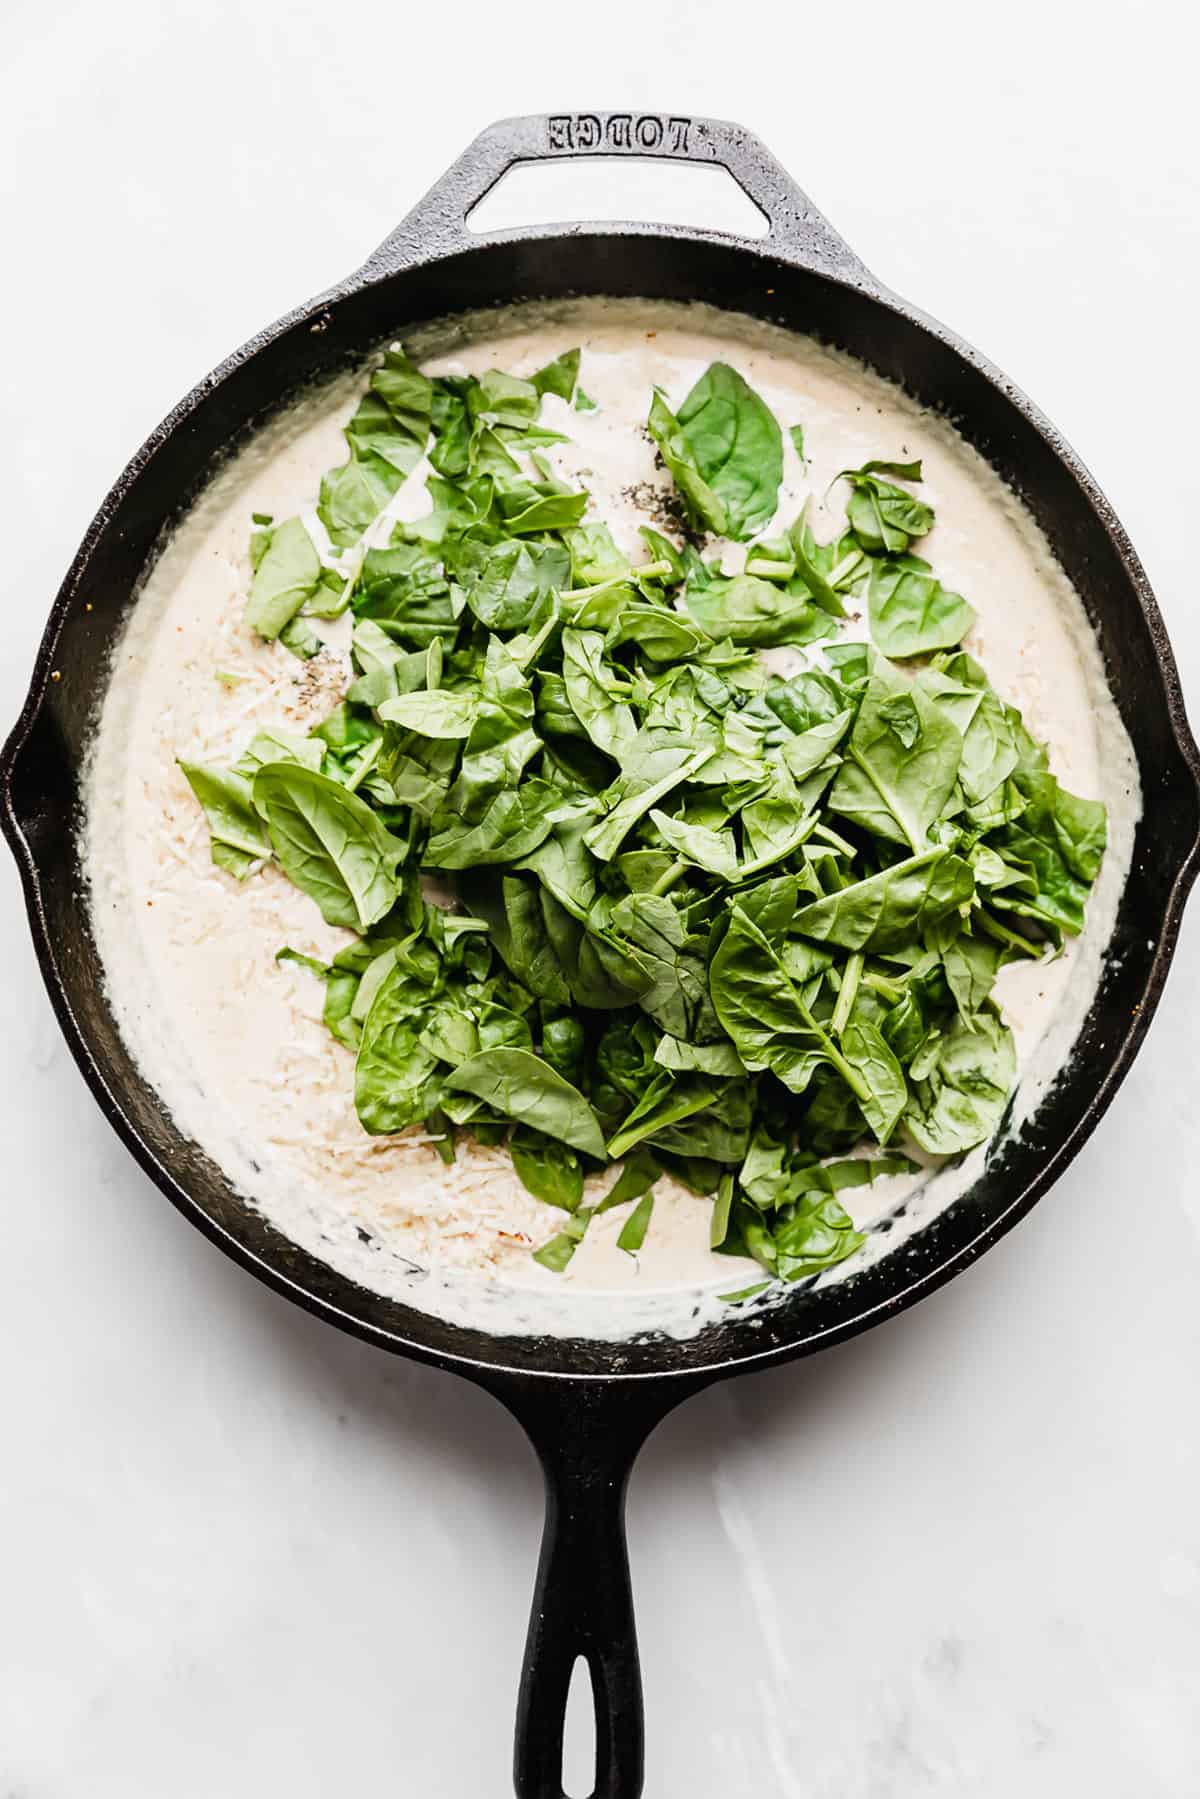 Spinach overtop a tan tuscan chicken gravy mixture in a skillet on a white background.